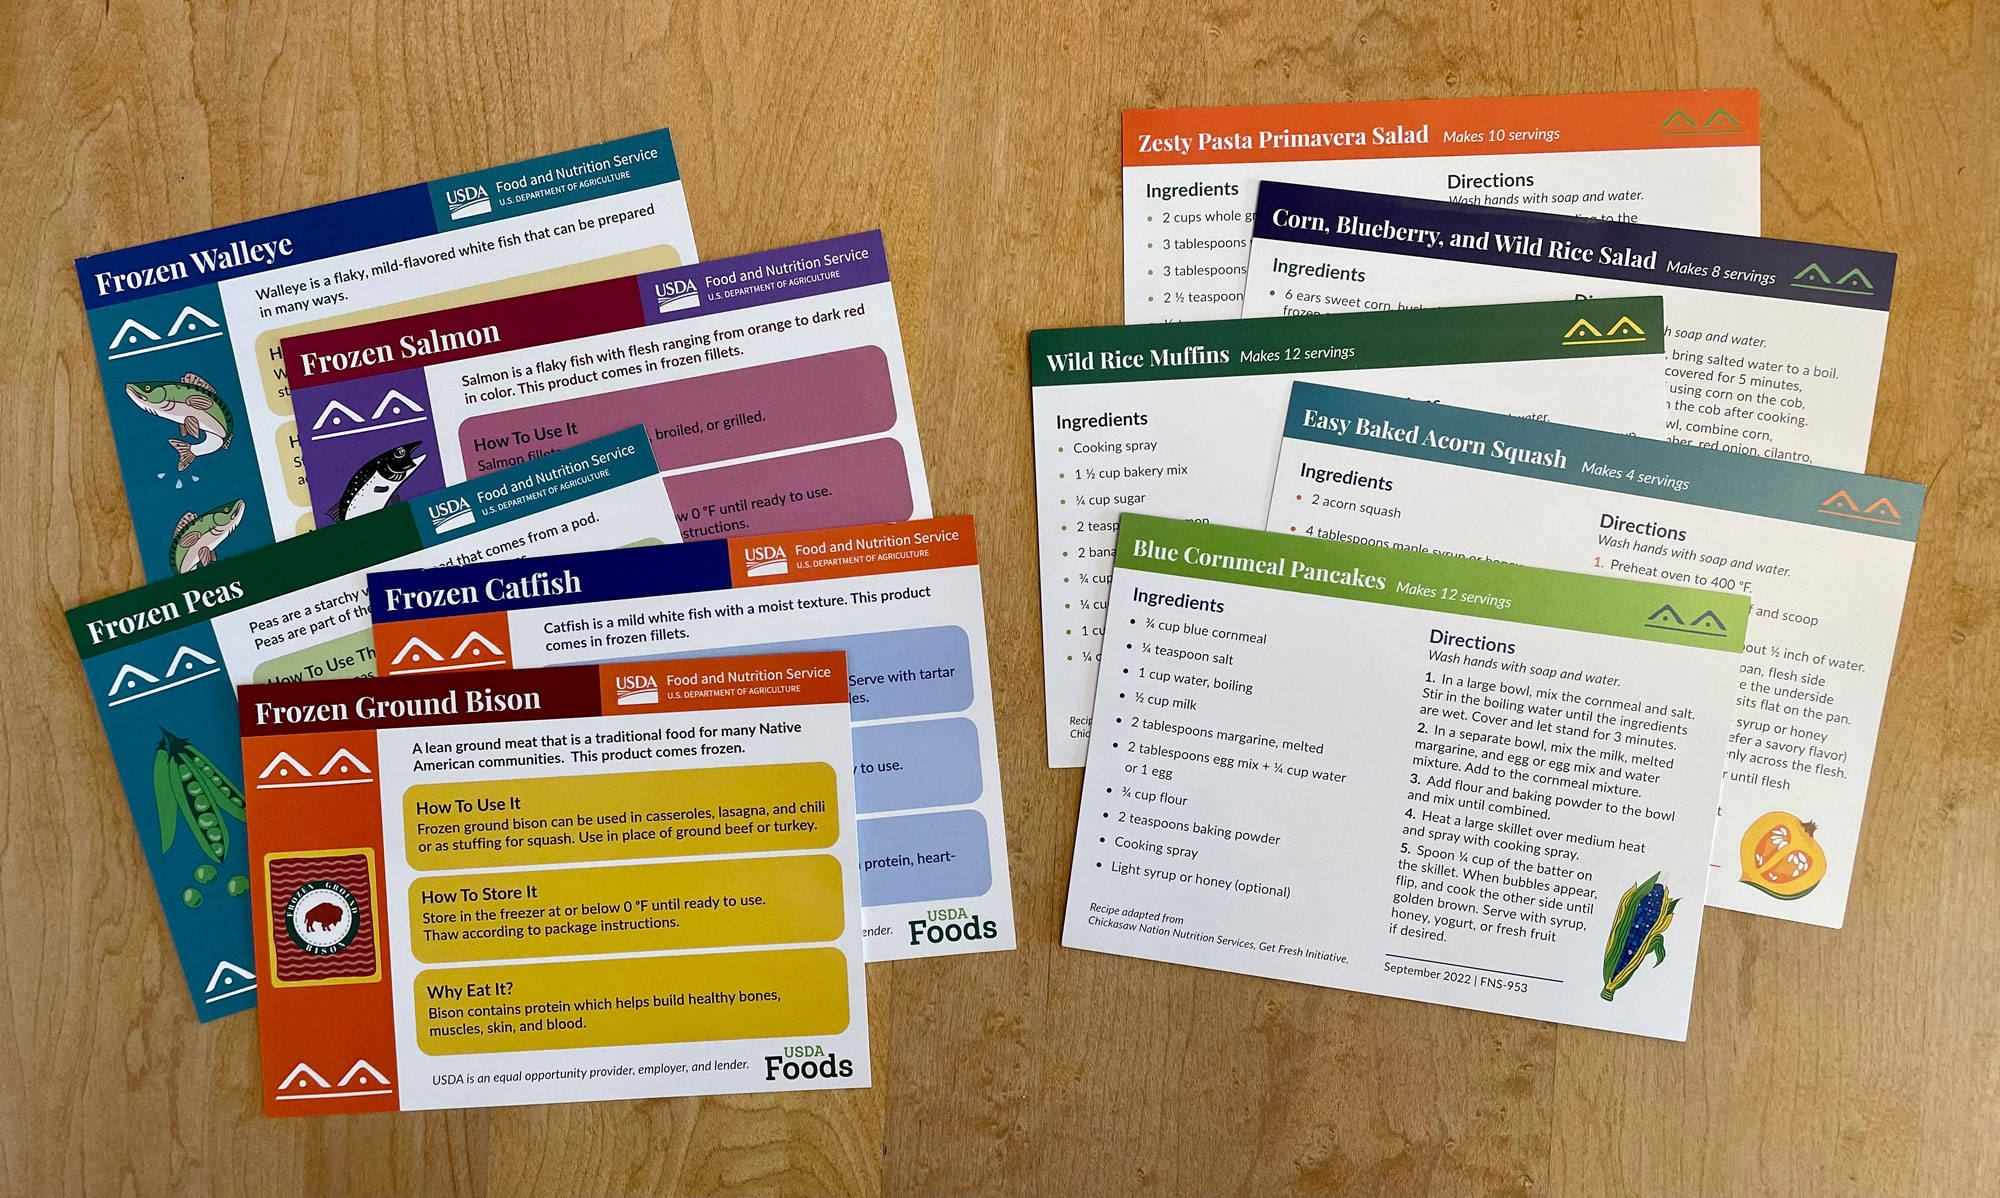 Ten colorful recipe cards contain nutrition information and cooking instructions